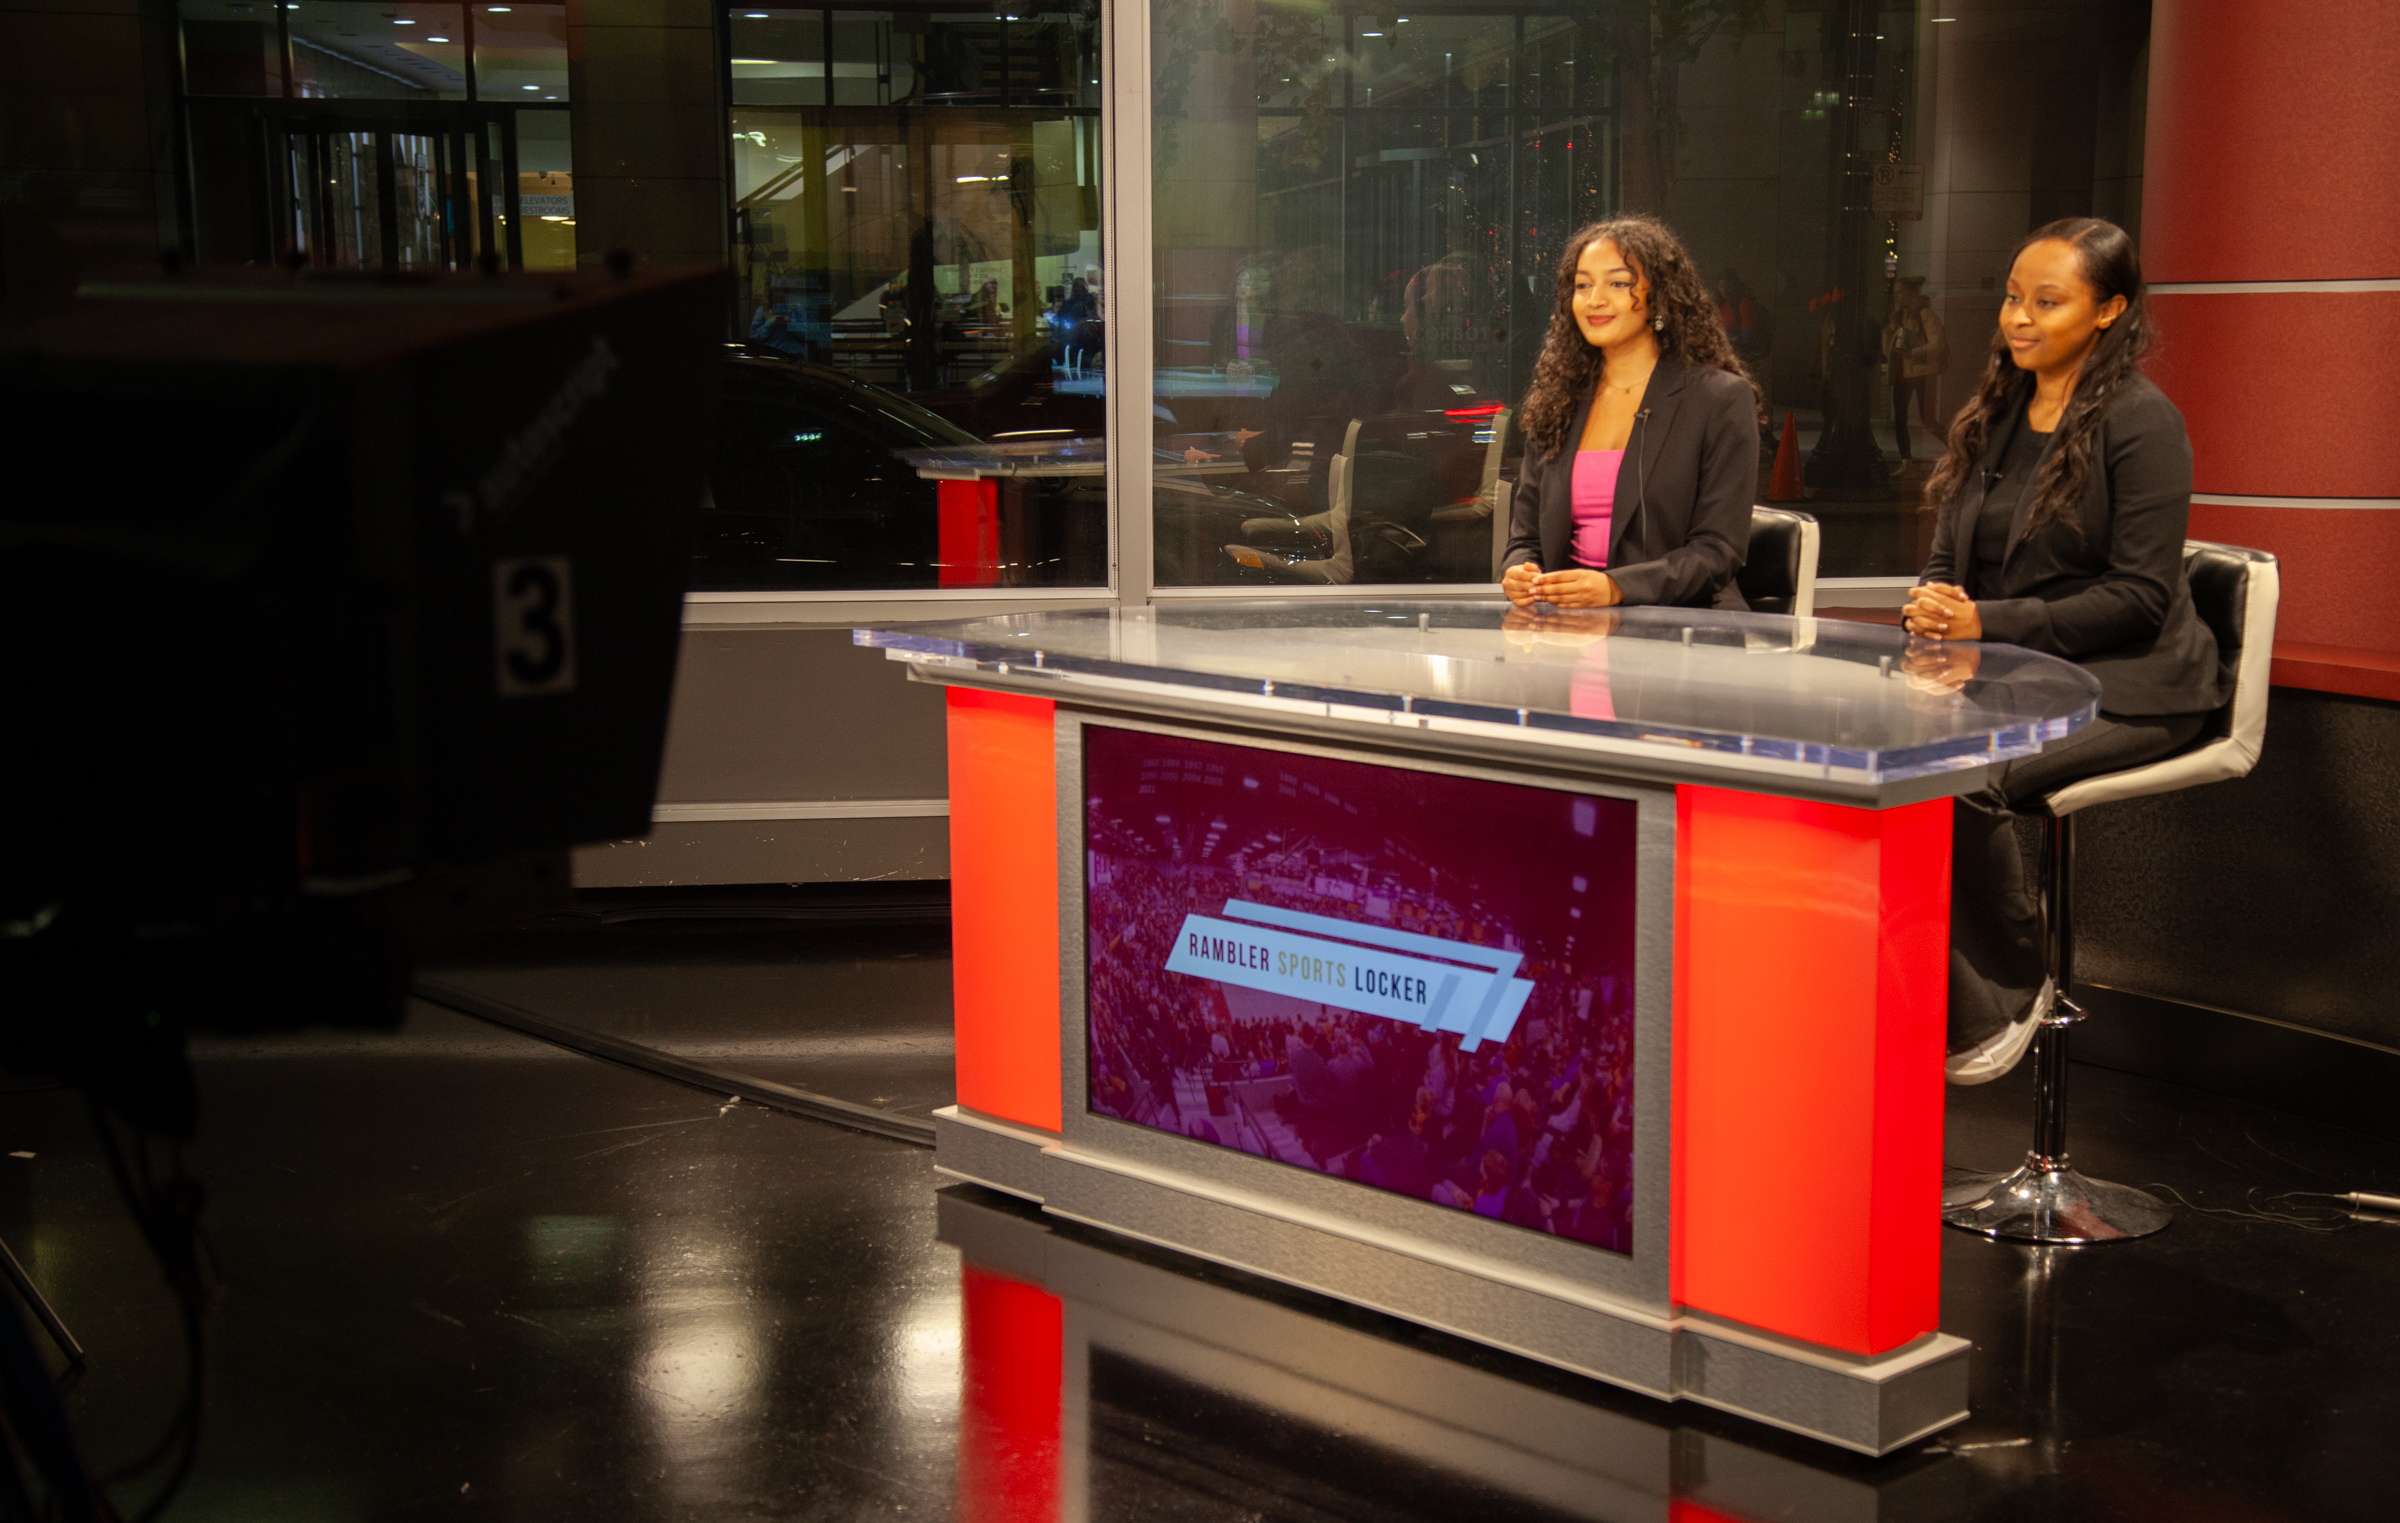 The SOC’s new anchor desk has state-of the art features such as lighted columns that change colors and a 50-inch LED smart TV in front that can display video and graphics. Photo by Jamason Chen